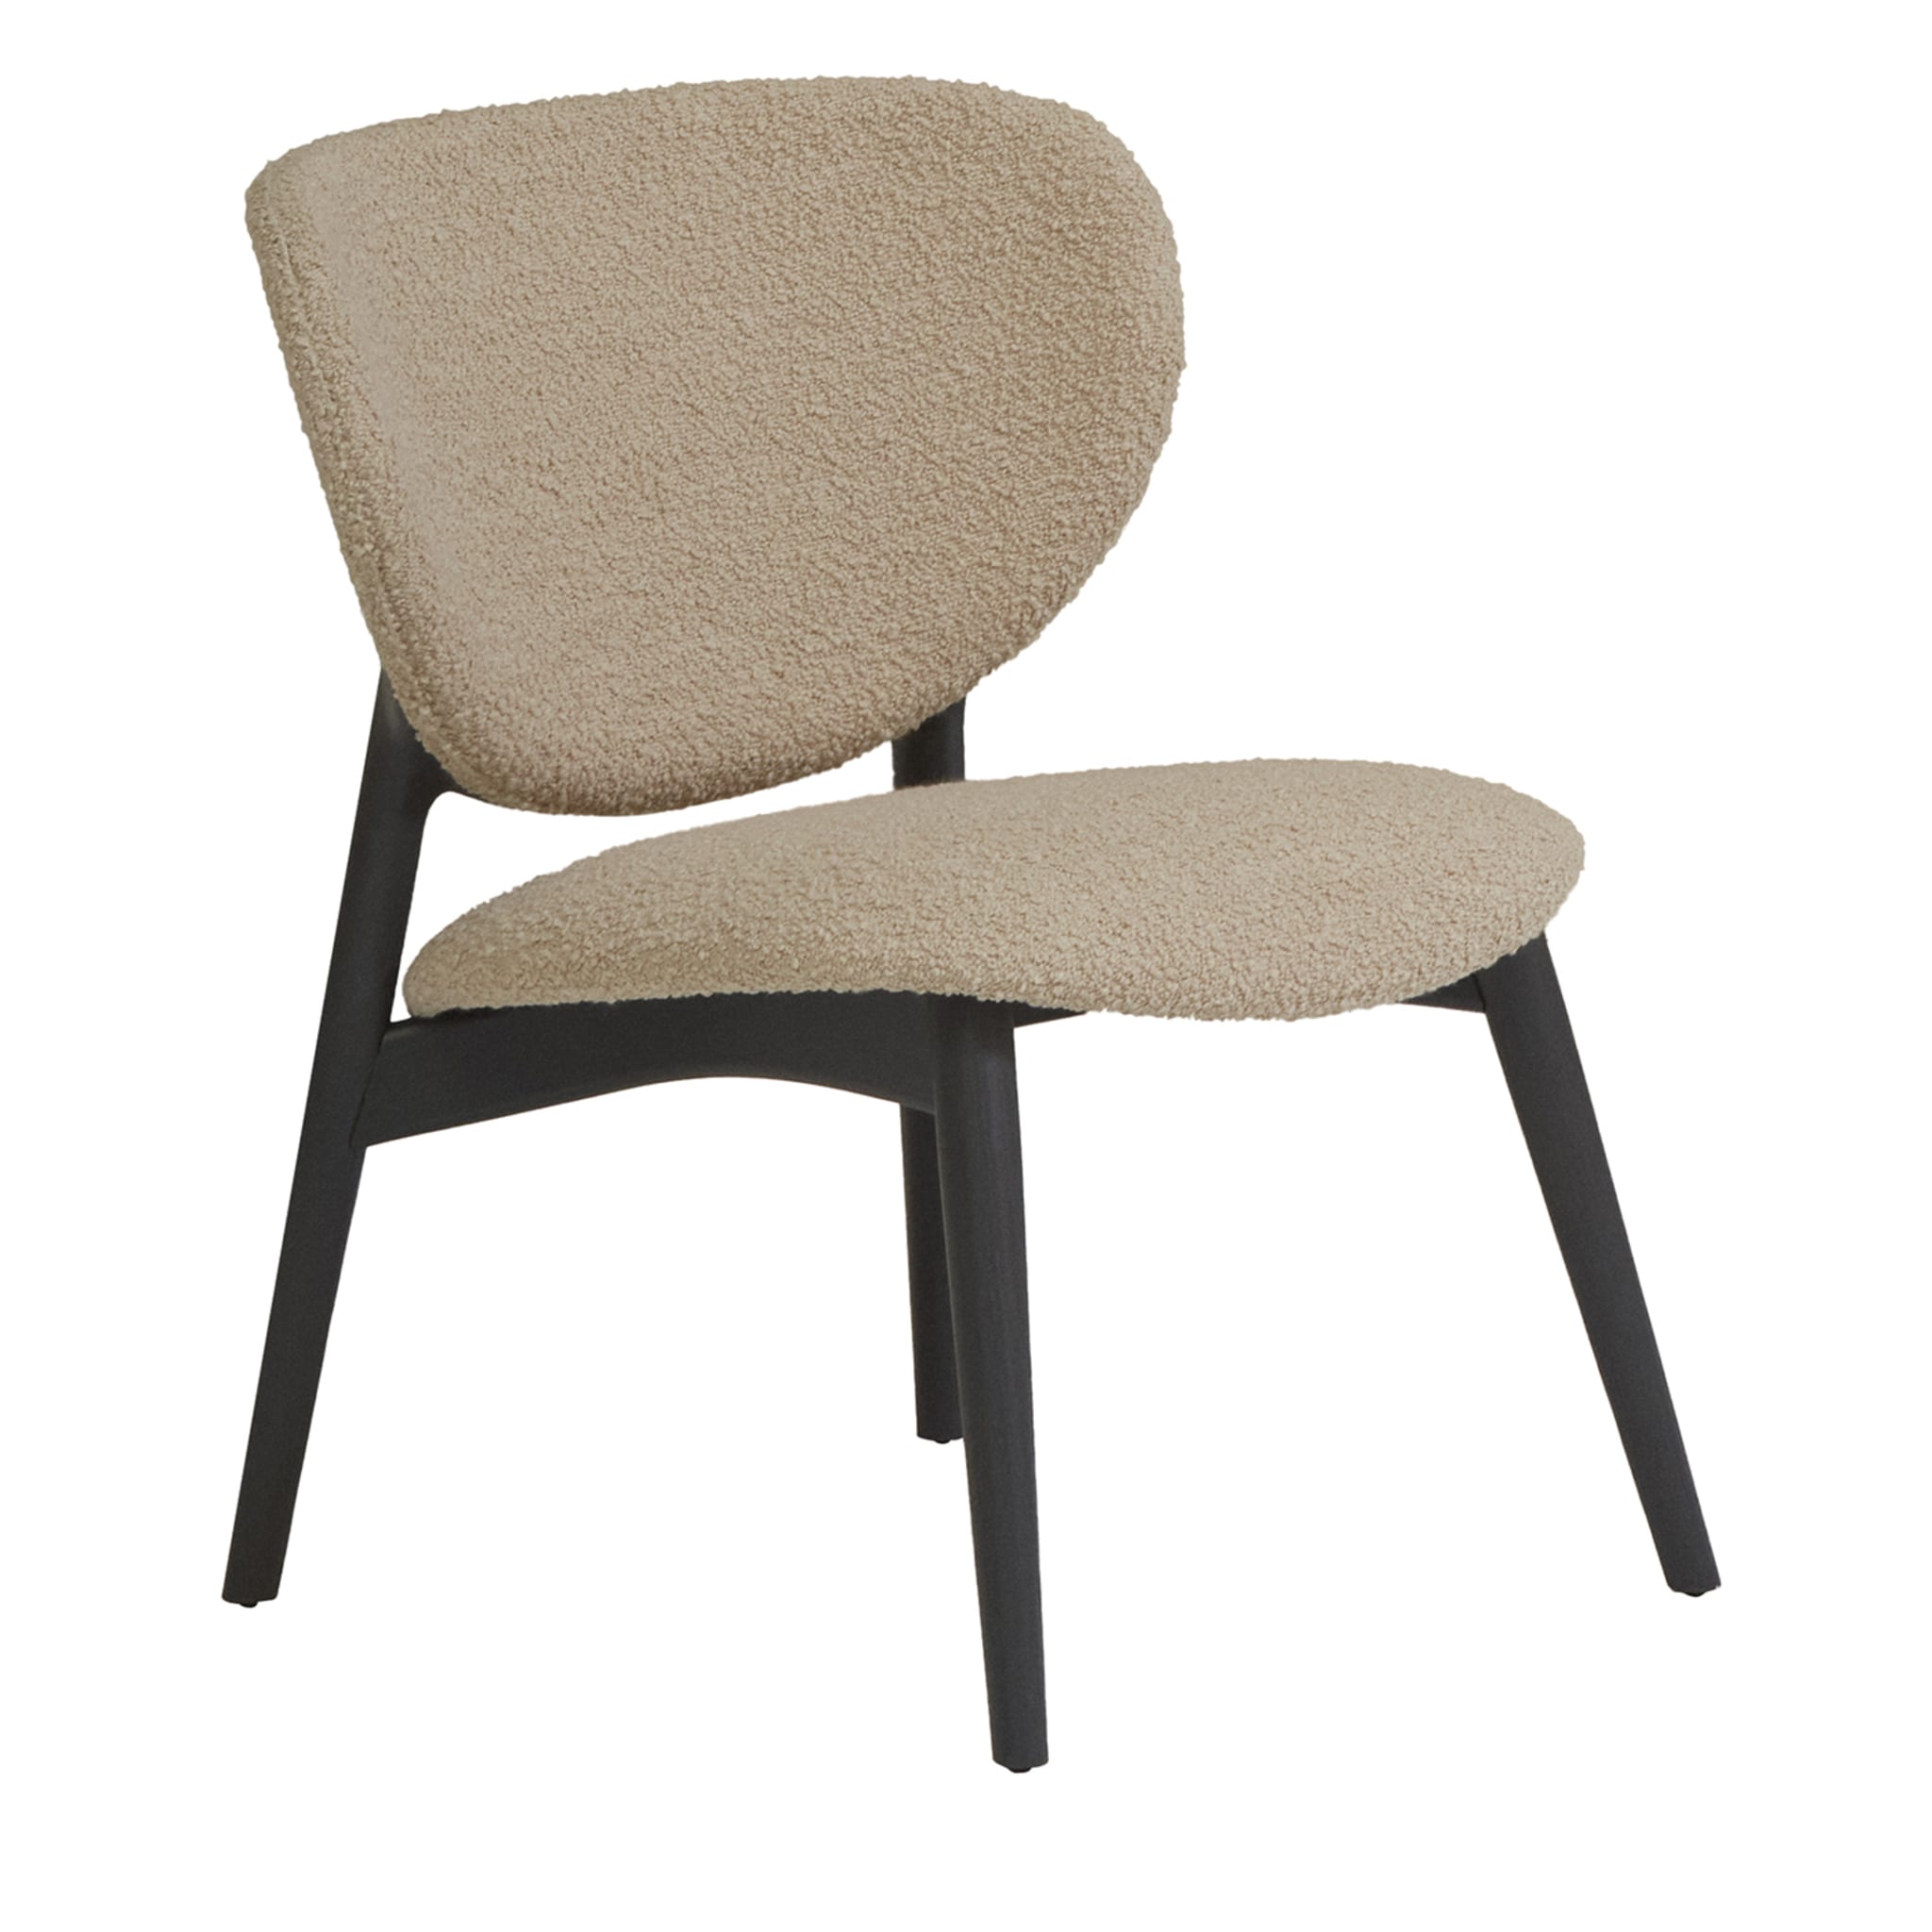 Fleuron 203 Anthracite & Beige Lounge Chair by Constance Guisset - Main view